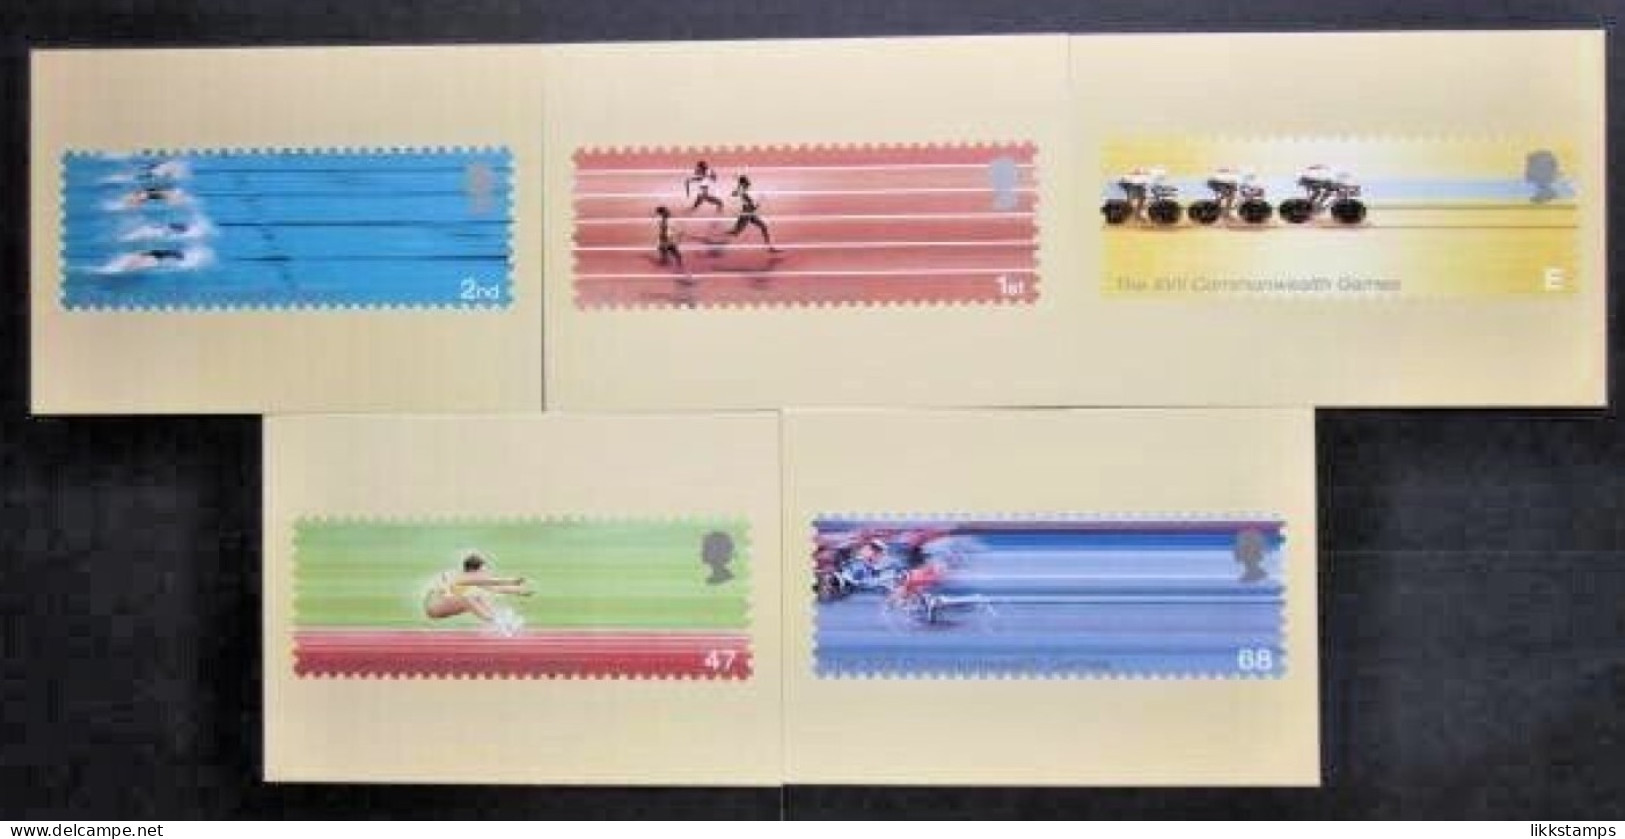 2002 THE 17th COMMONWEALTH GAMES P.H.Q. CARDS UNUSED, ISSUE No. 243 (A) #01700 - Cartes PHQ